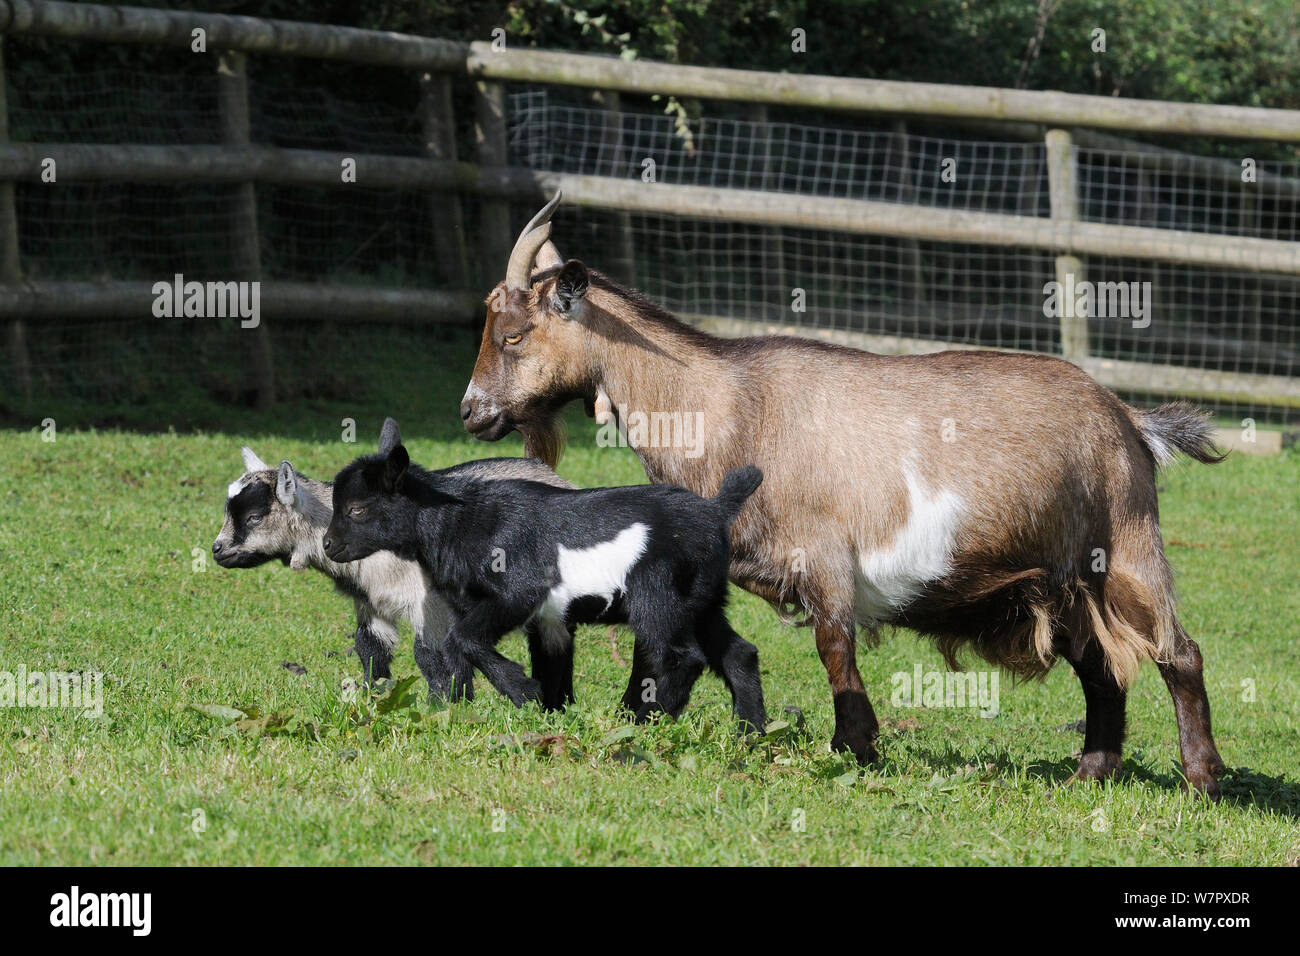 Mother Pygmy goat (Capra hircus) walking with two young kids in a fenced paddock, Wiltshire, UK, September. Stock Photo